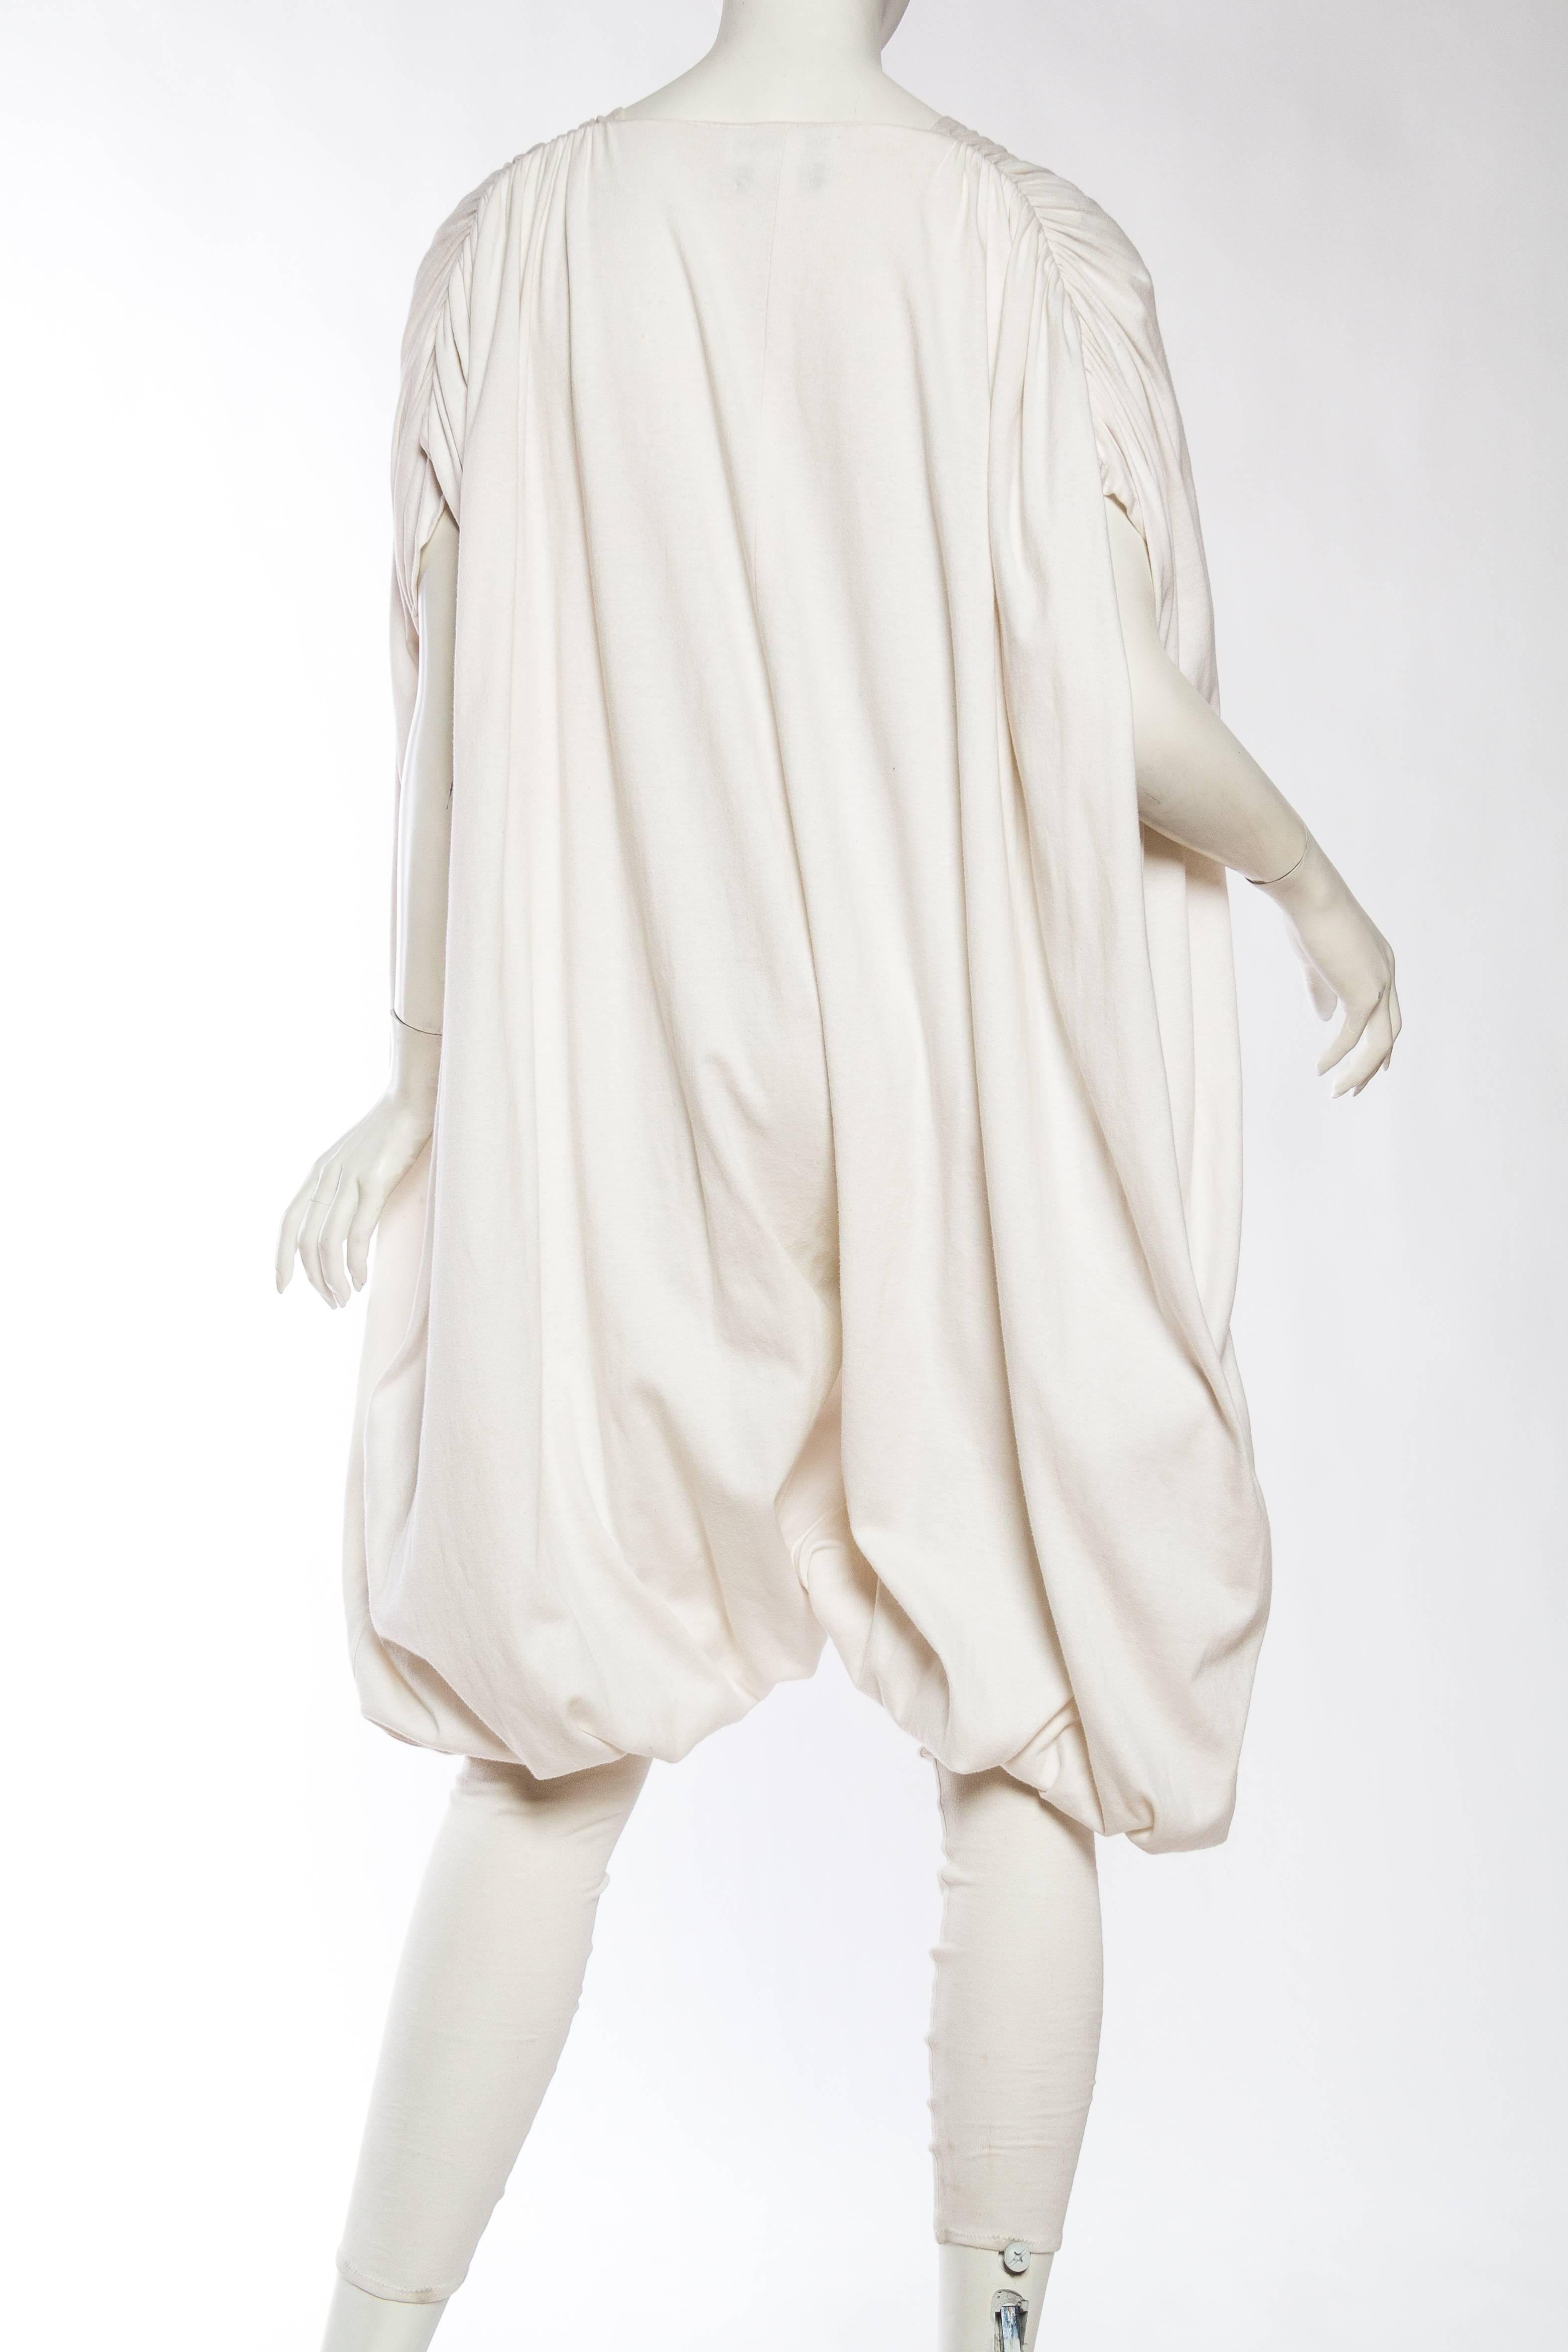 Early Norma Kamali from the 1970s Volumunous White Cotton Jersey Jumpsuit 1